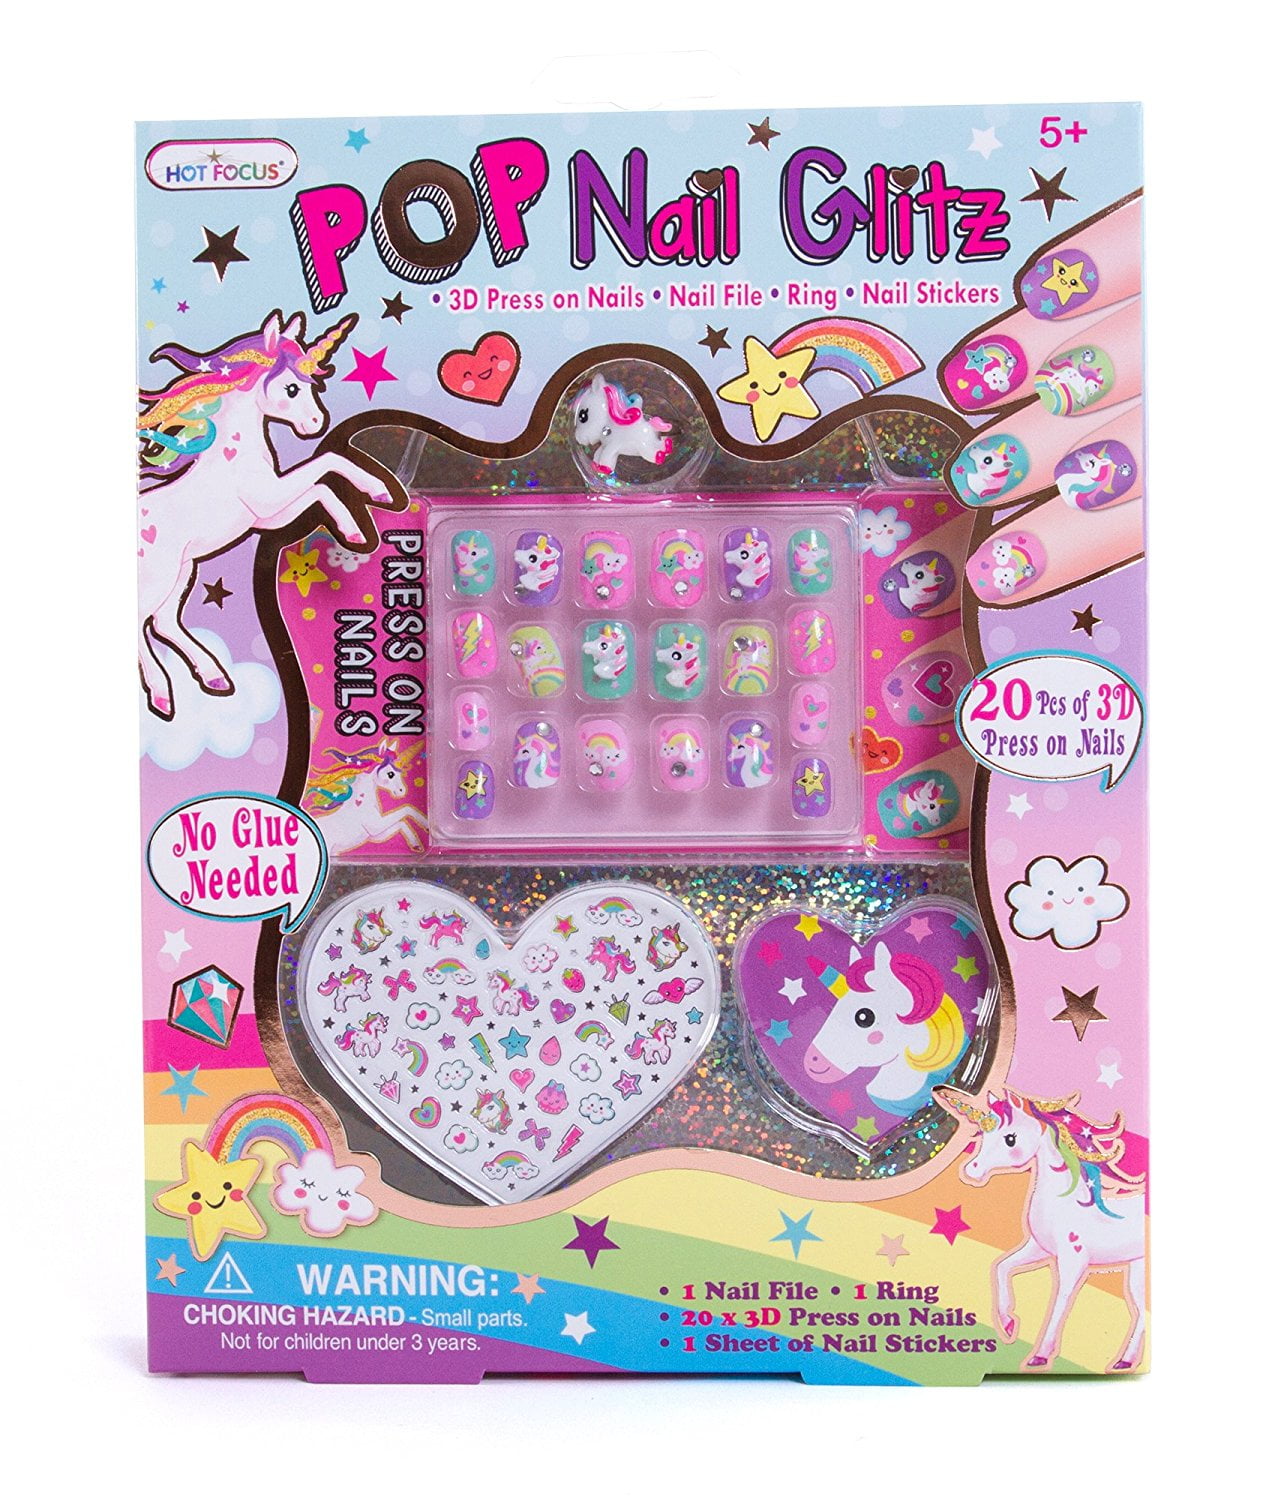 Hot Focus Unicorn Nail Kit – Kids Nail Polish Set for Girls Ages 5 6 7-12  with 77+ Pieces, Spa Kit, Nail Art Decoration Set, Glow-in-the-dark,  Stickers, and Wat…